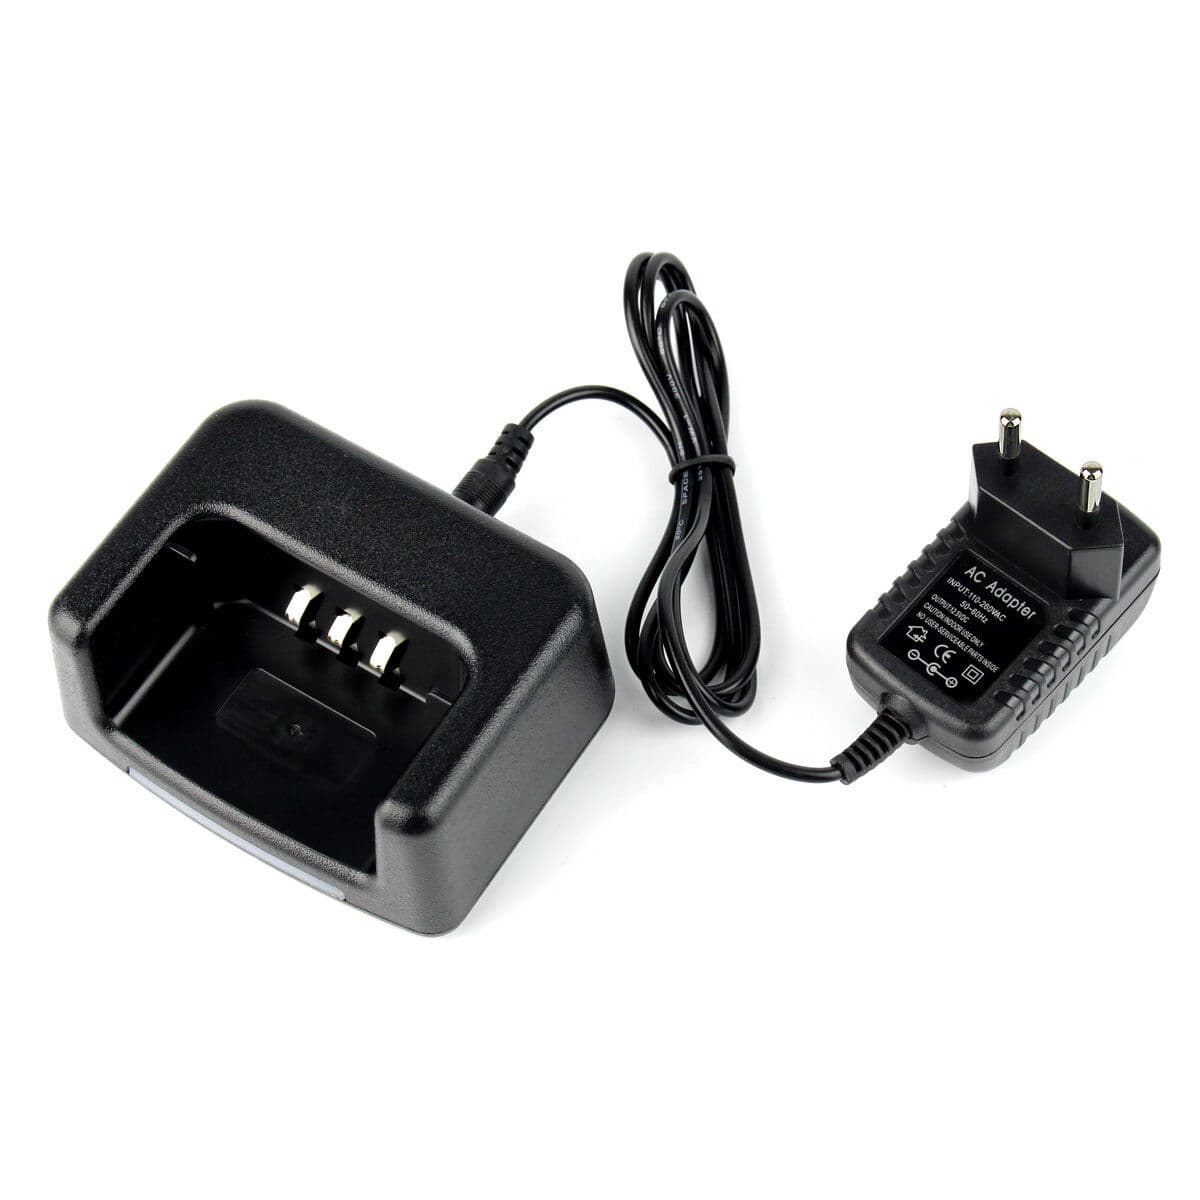 Original Radio Battery Charger Station for Retevis RT3 Walkie Talkie